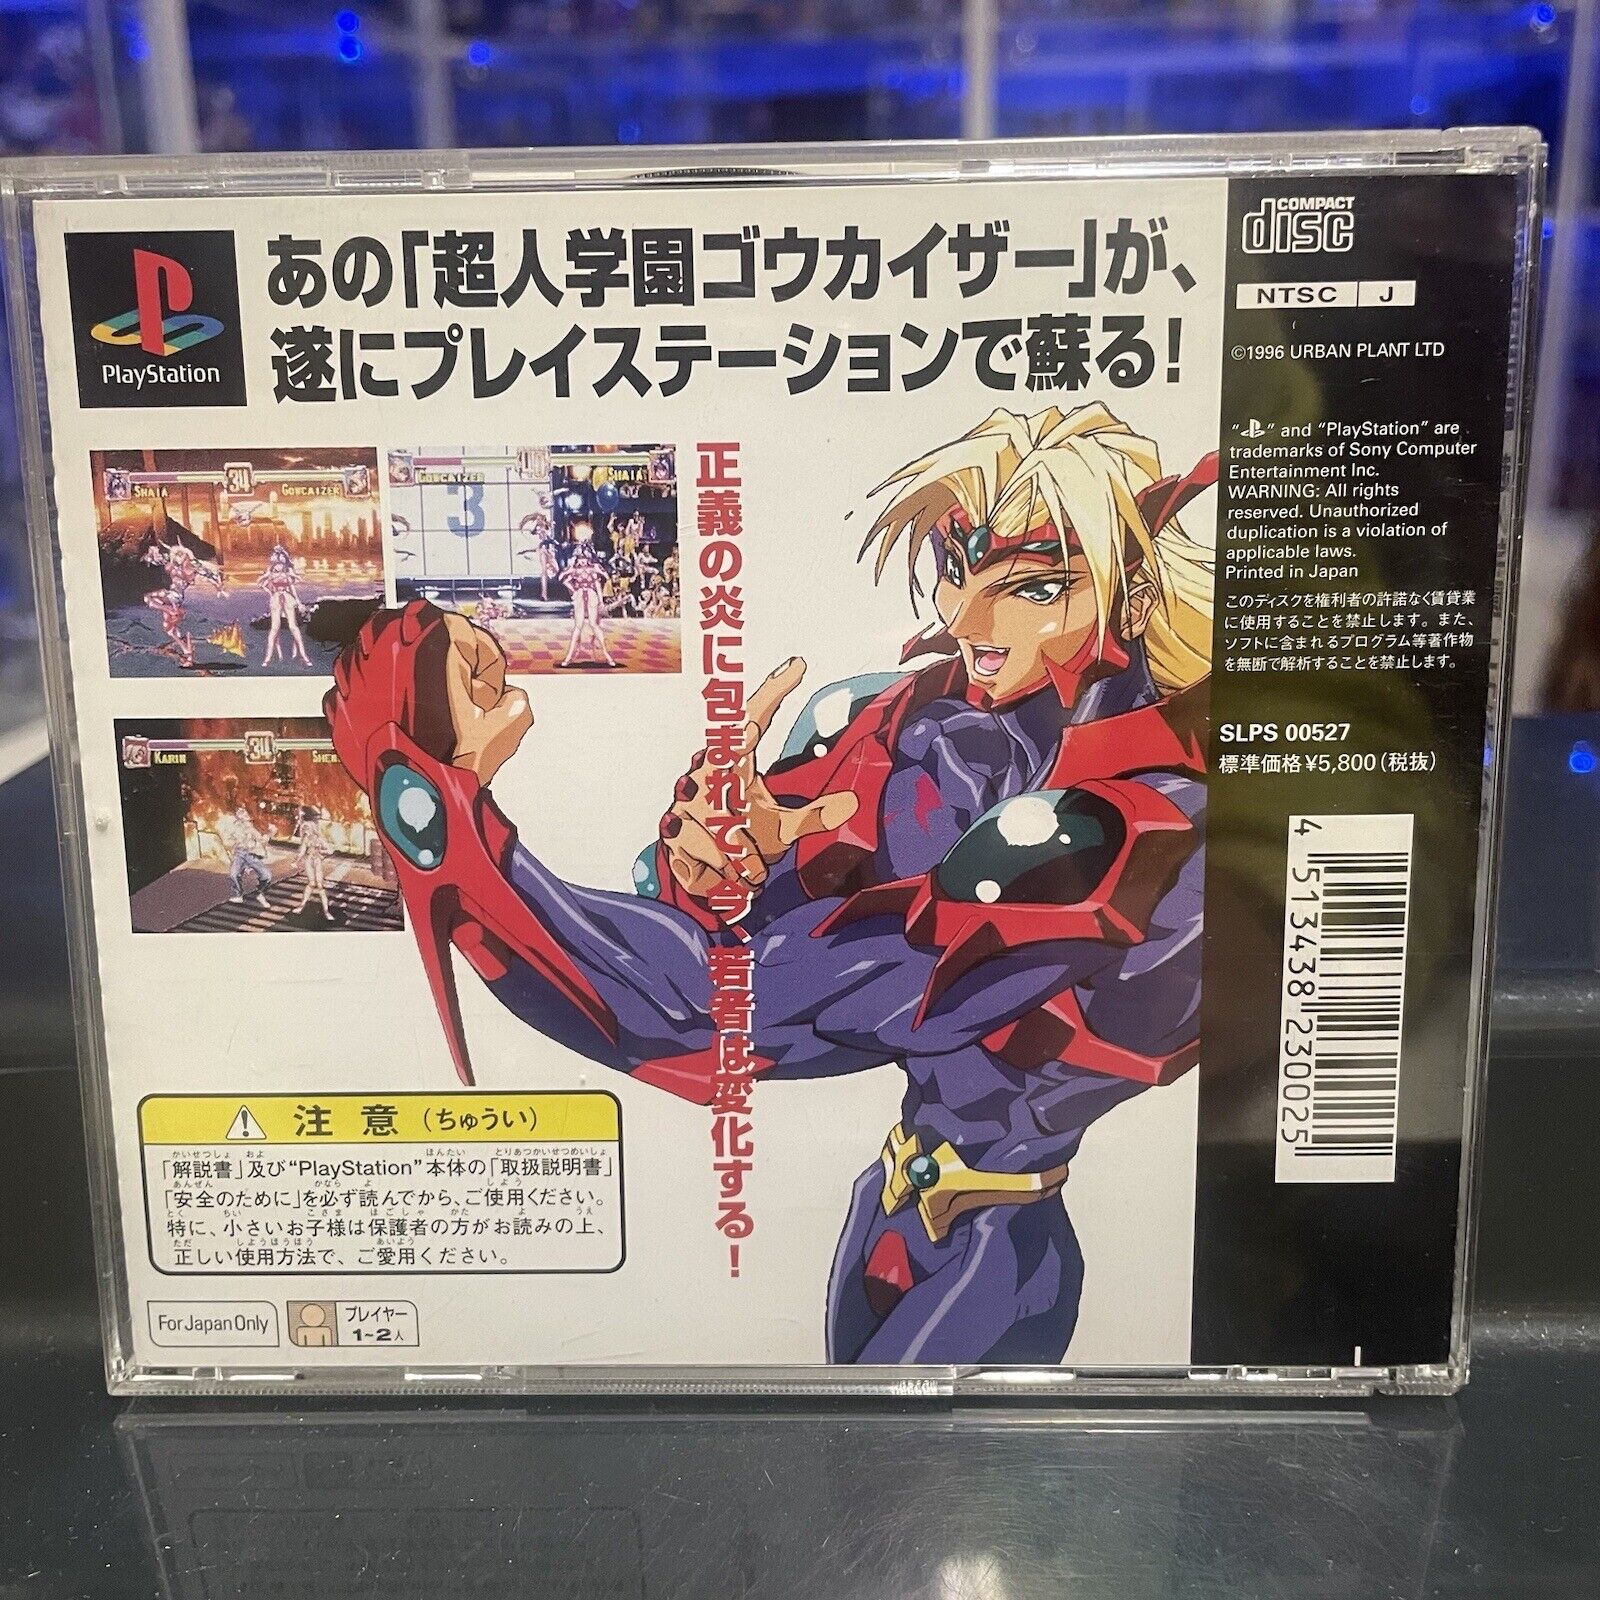 Ps1-Voltage-Fighter-Gowcaiser-Sony-Playstation-Ntsc-JAP-Slps-000527-RARO-134794808243-2